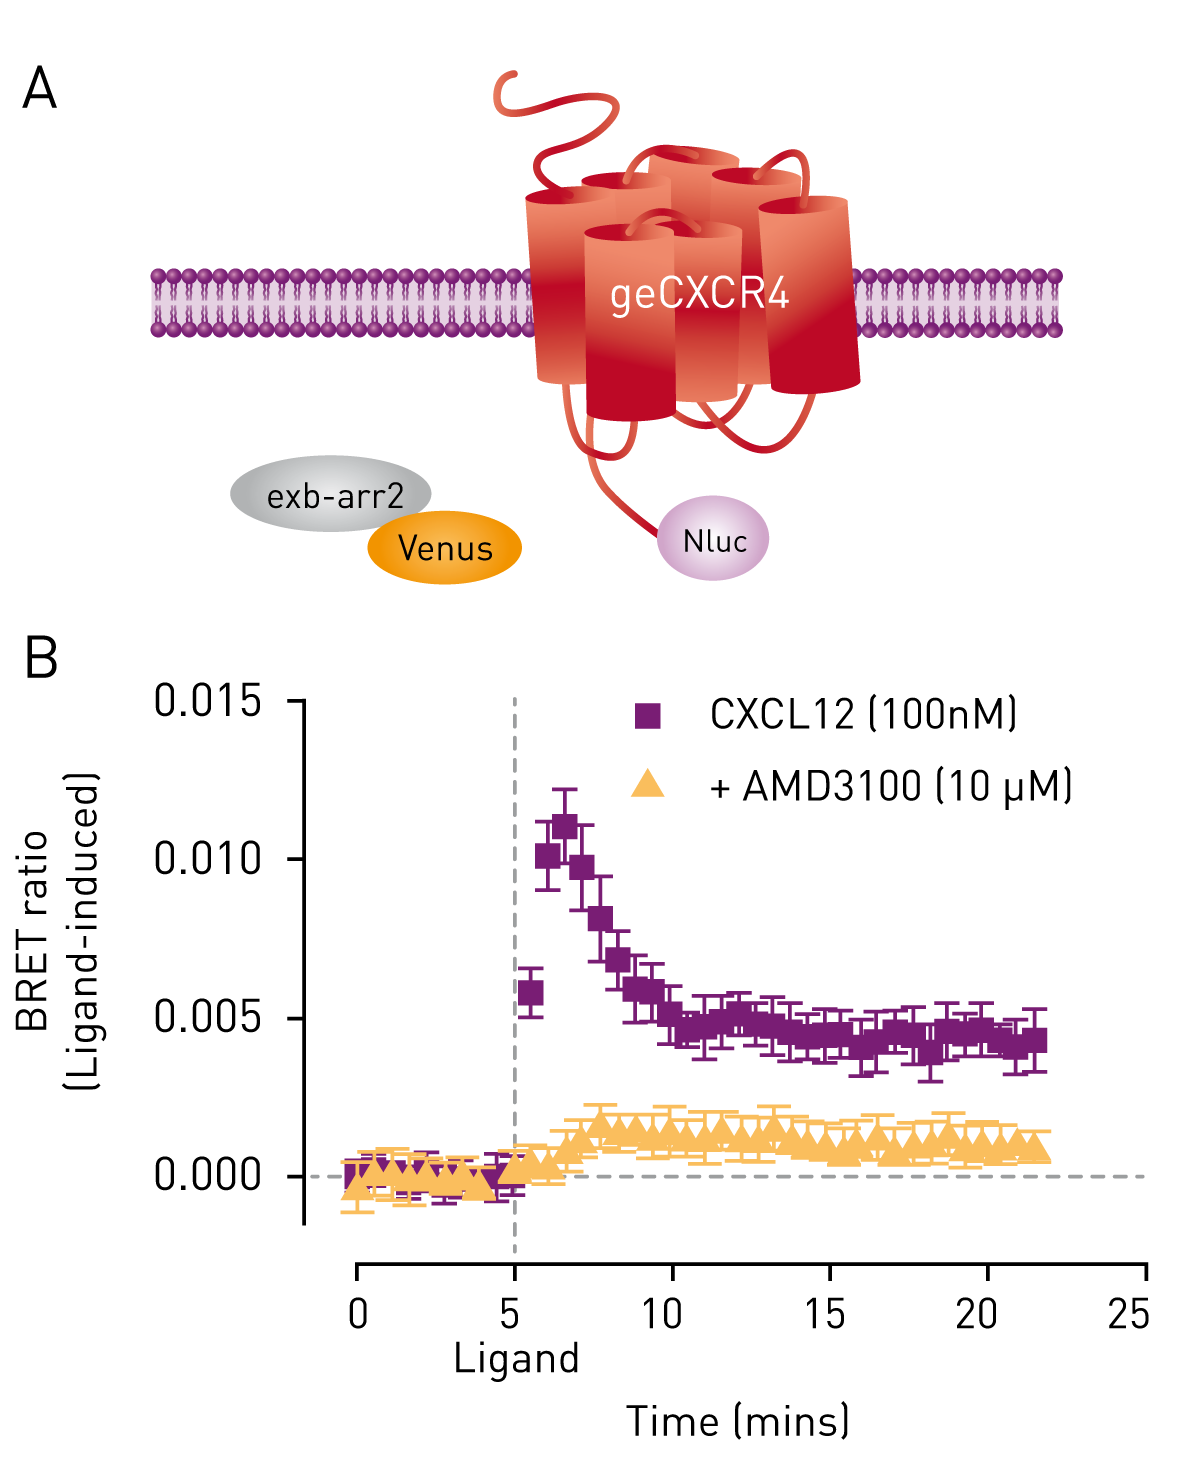 Fig. 1: Monitoring β-arrestin2 recruitment to genome-edited CXCR4/Nluc using nanoBRET. HEK293FT cells expressing genome-edited CXCR4 fused to Nluc (geCXCR4/Nluc) transiently transfected with cDNA coding for β-arrestin2/Venus (exβ-arr2/Venus) (A) were used to determine ligand-dependent CXCL12 (100 nM) recruitment of β-arrestin2 to CXCR4 in the absence or presence of the CXCR4 antagonist AMD3100 (10 μM) (B). Data previously published in White et al. (2017).